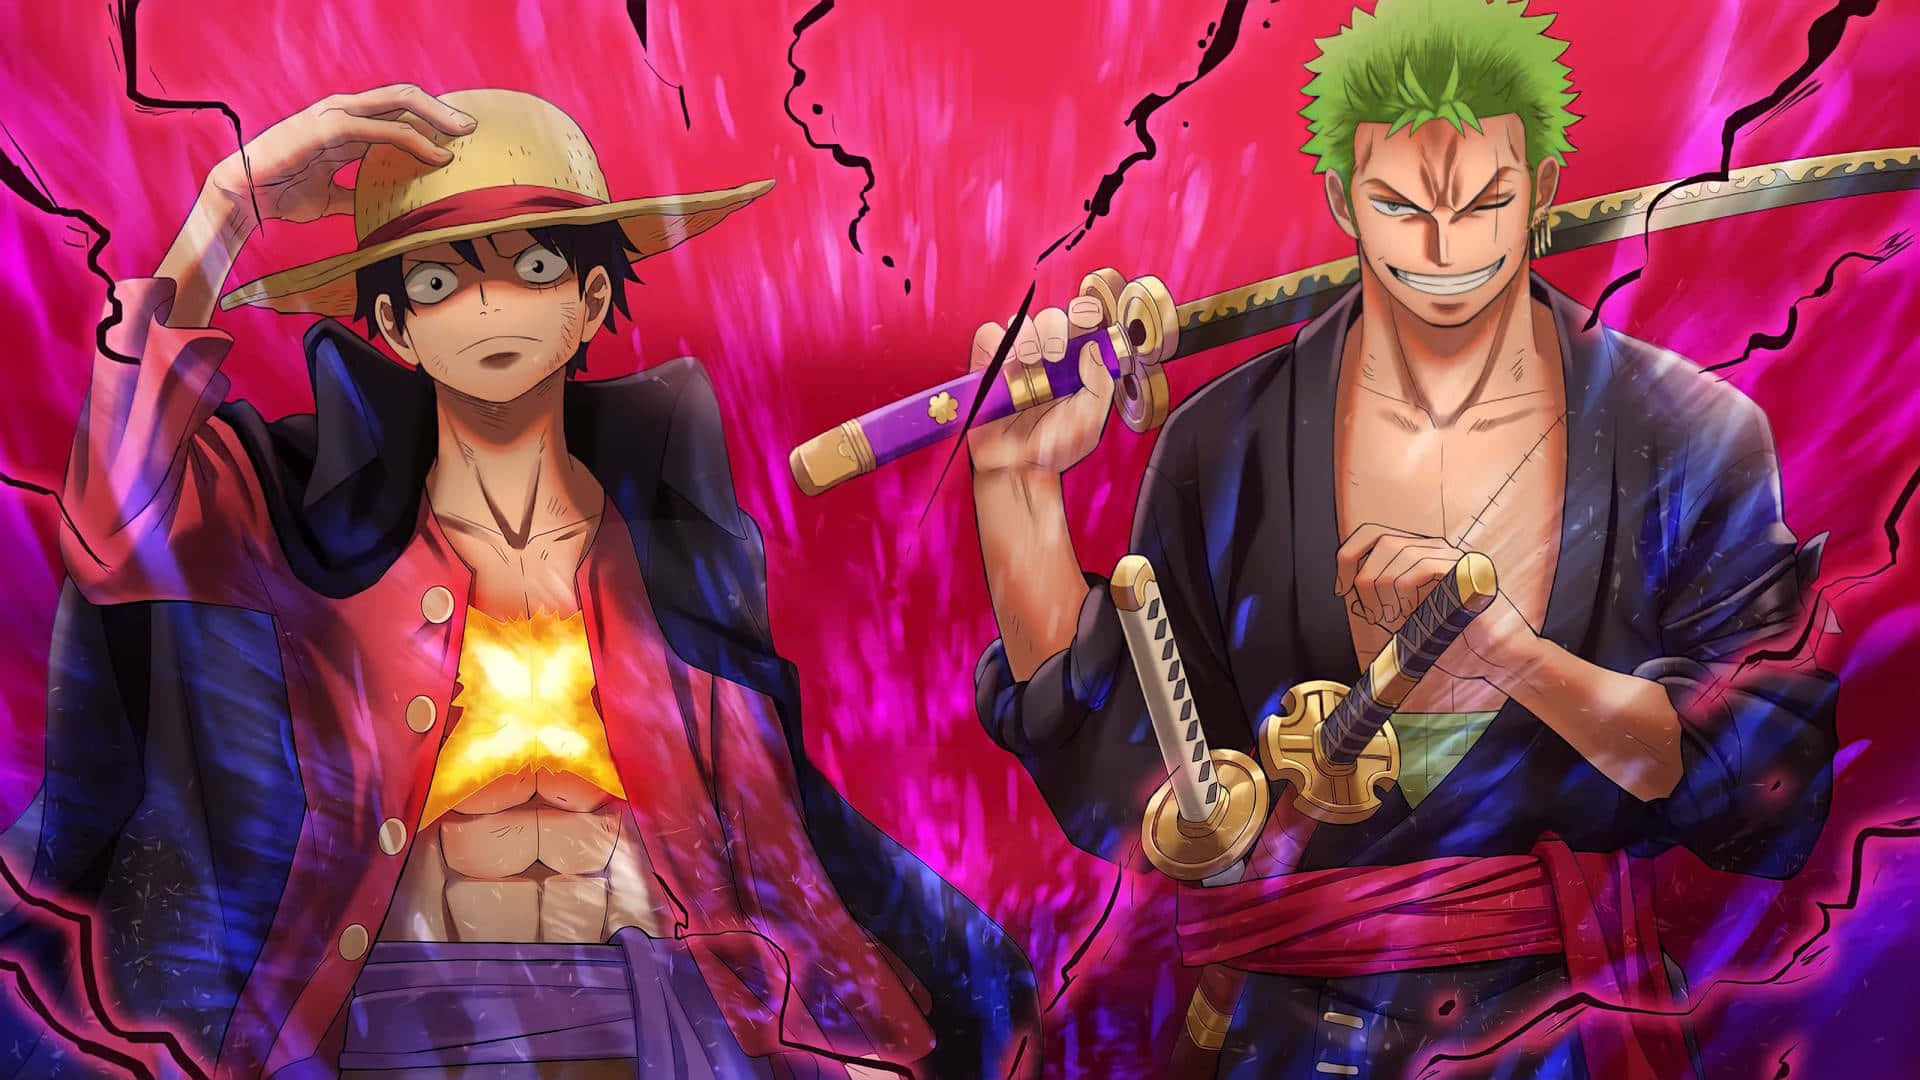 The Adventure Begins! One Piece Characters Assemble Wallpaper